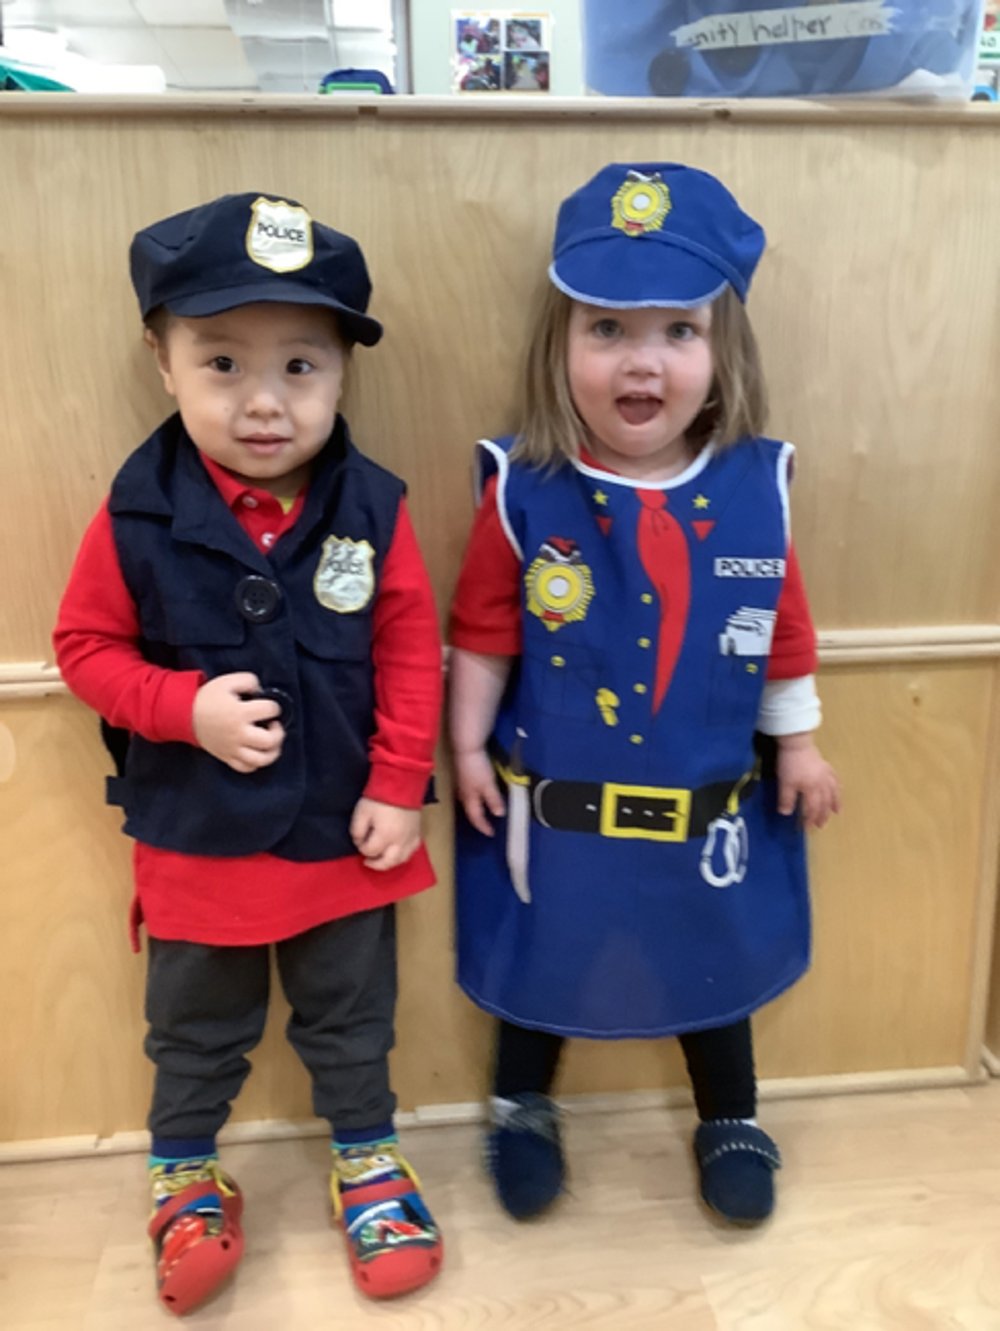 boy and girl wearing a police costume standing together inside mosaic facility skokie il
Dempster Street Illinois for Mosaic Early Childhood Center Infant Program Preschool Discovery Program Kindergarten Montessori Program Summer CampTutorial/Tutoring Services Before and After School E-Learning Remote Preschool Toddler Care Daycare Skokie IL Portage Park Child care Childcare NAEYC Early childhood Babysitting School Family owned Personalized Part time child care Part time childcare Full time child care Full time childcare Full time childcare Full time child care Part time child care Part time child careEvanstonMorton grove Niles Wilmette Chicago Irving park Chicago Sauganash Montessori  Niles township Action for children Action for kids Financial aid Free preschool Scholarship 